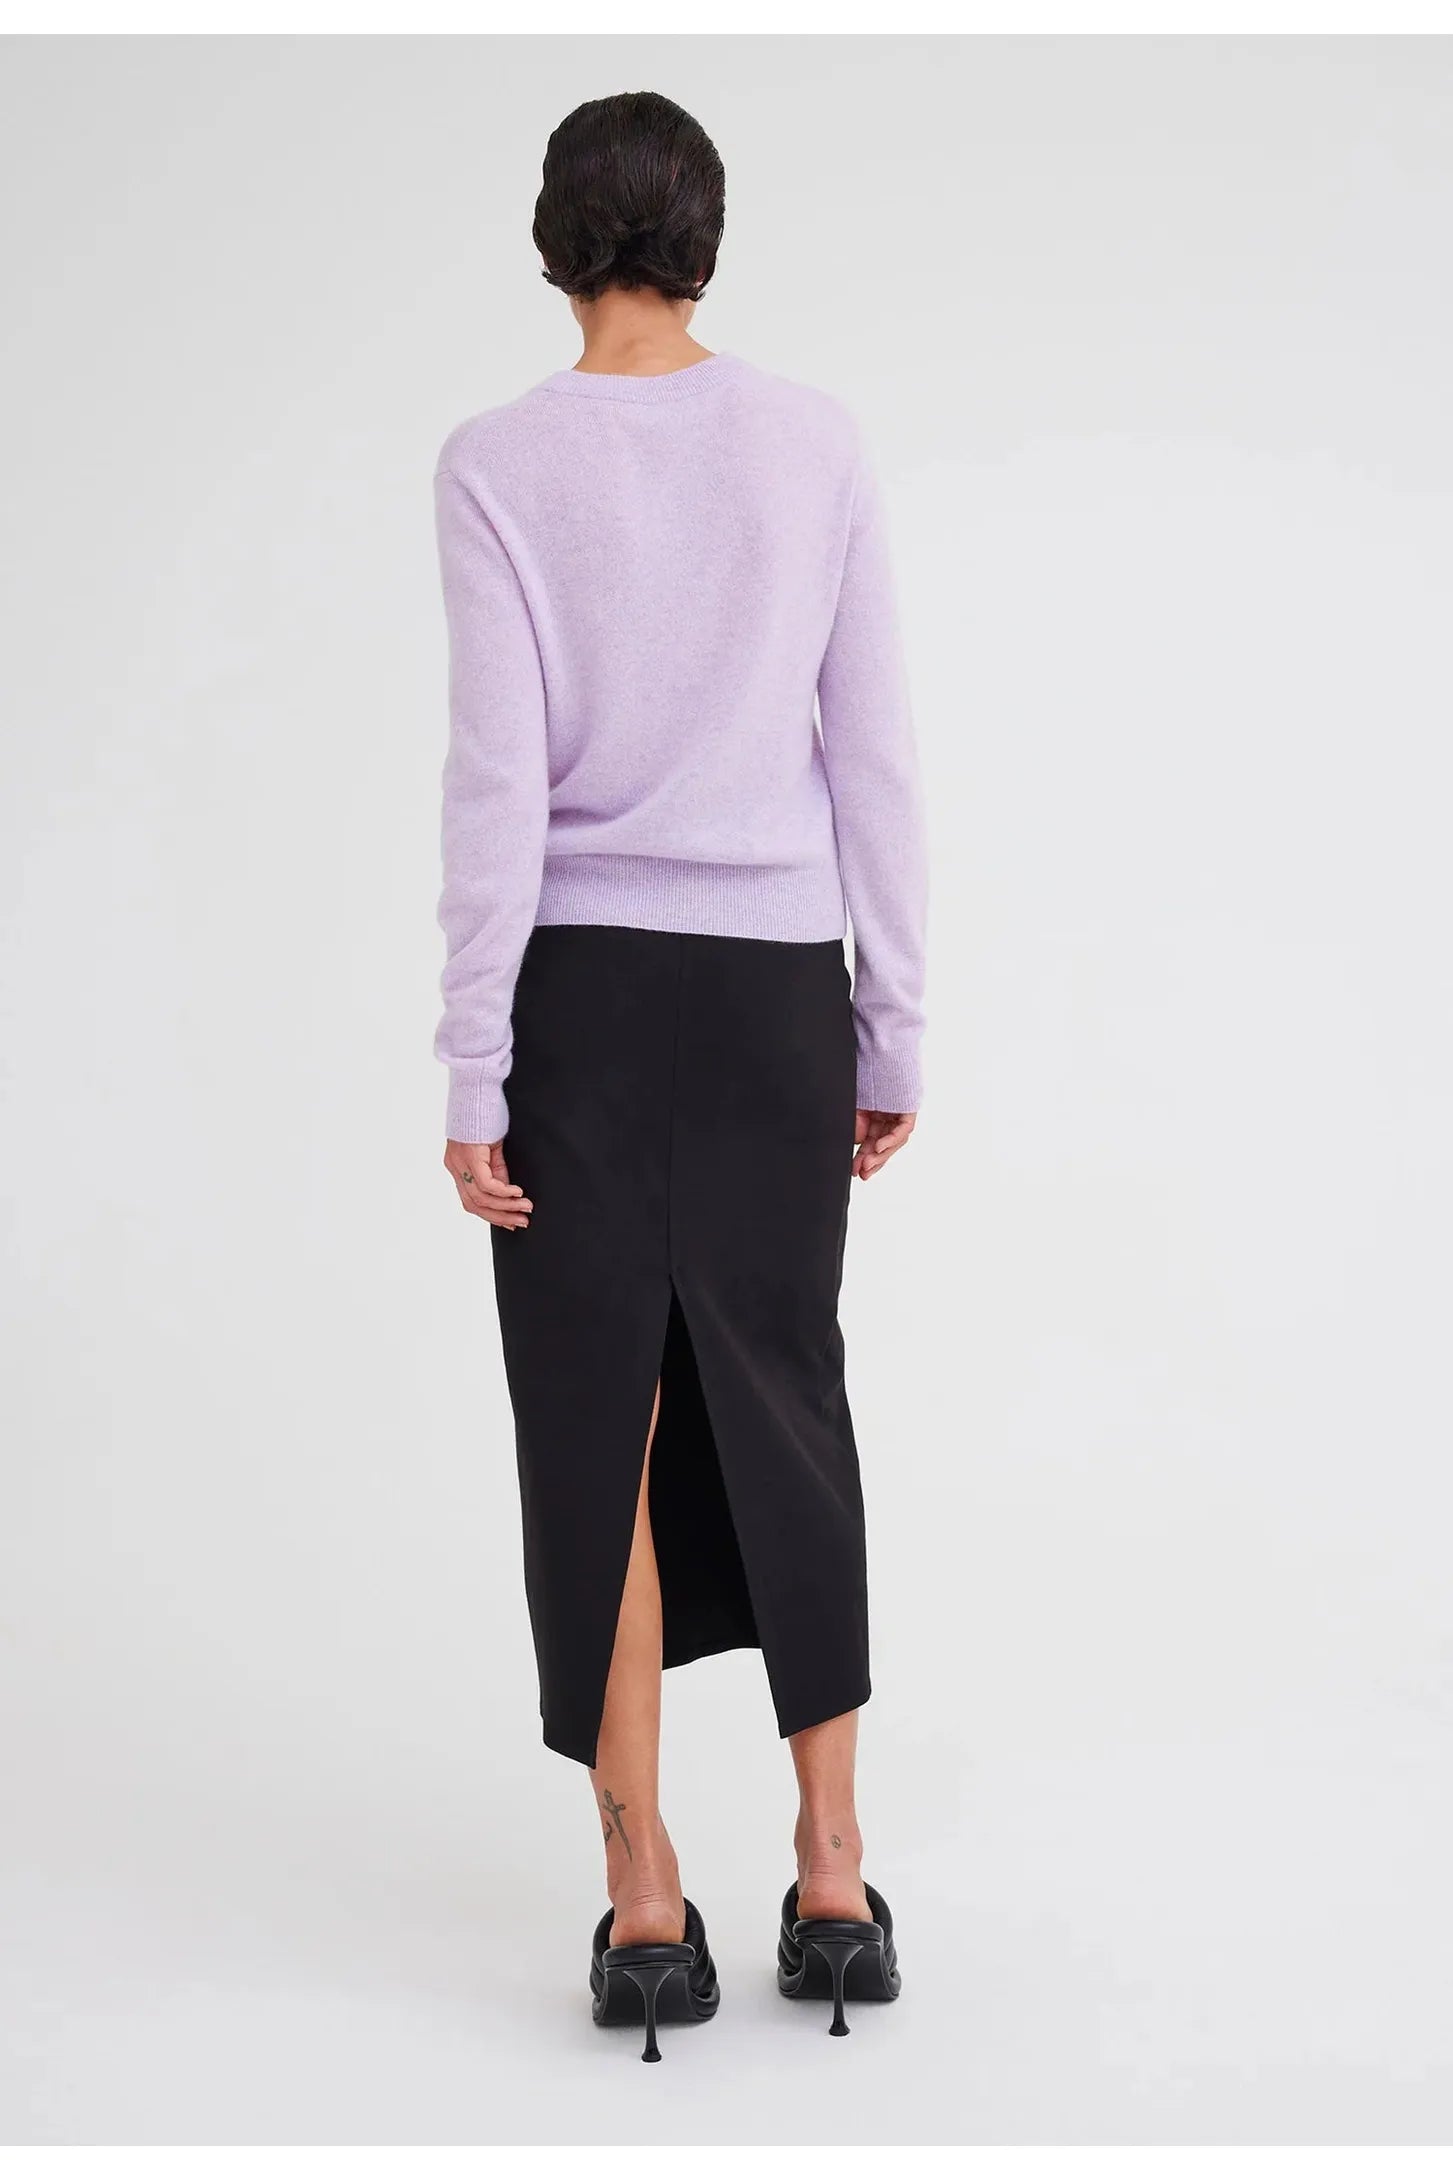 Peter Sweater in Lila Marle Purple by Jac + Jack